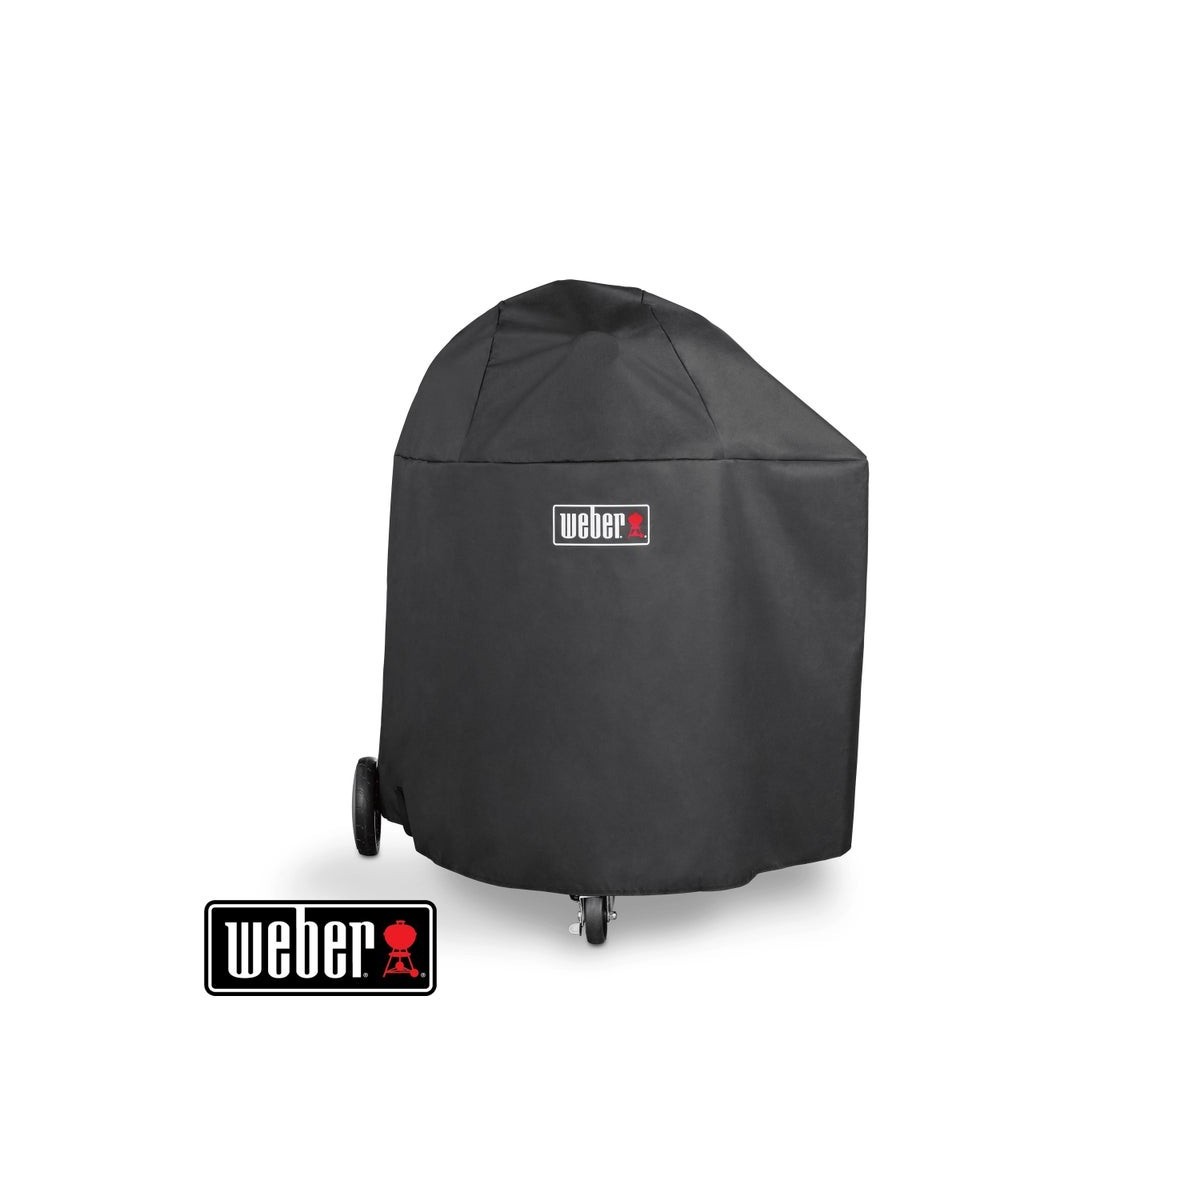 WEBER Premium Barbecue Cover - Fits Summit Kamado® Charcoal Grill, 7173